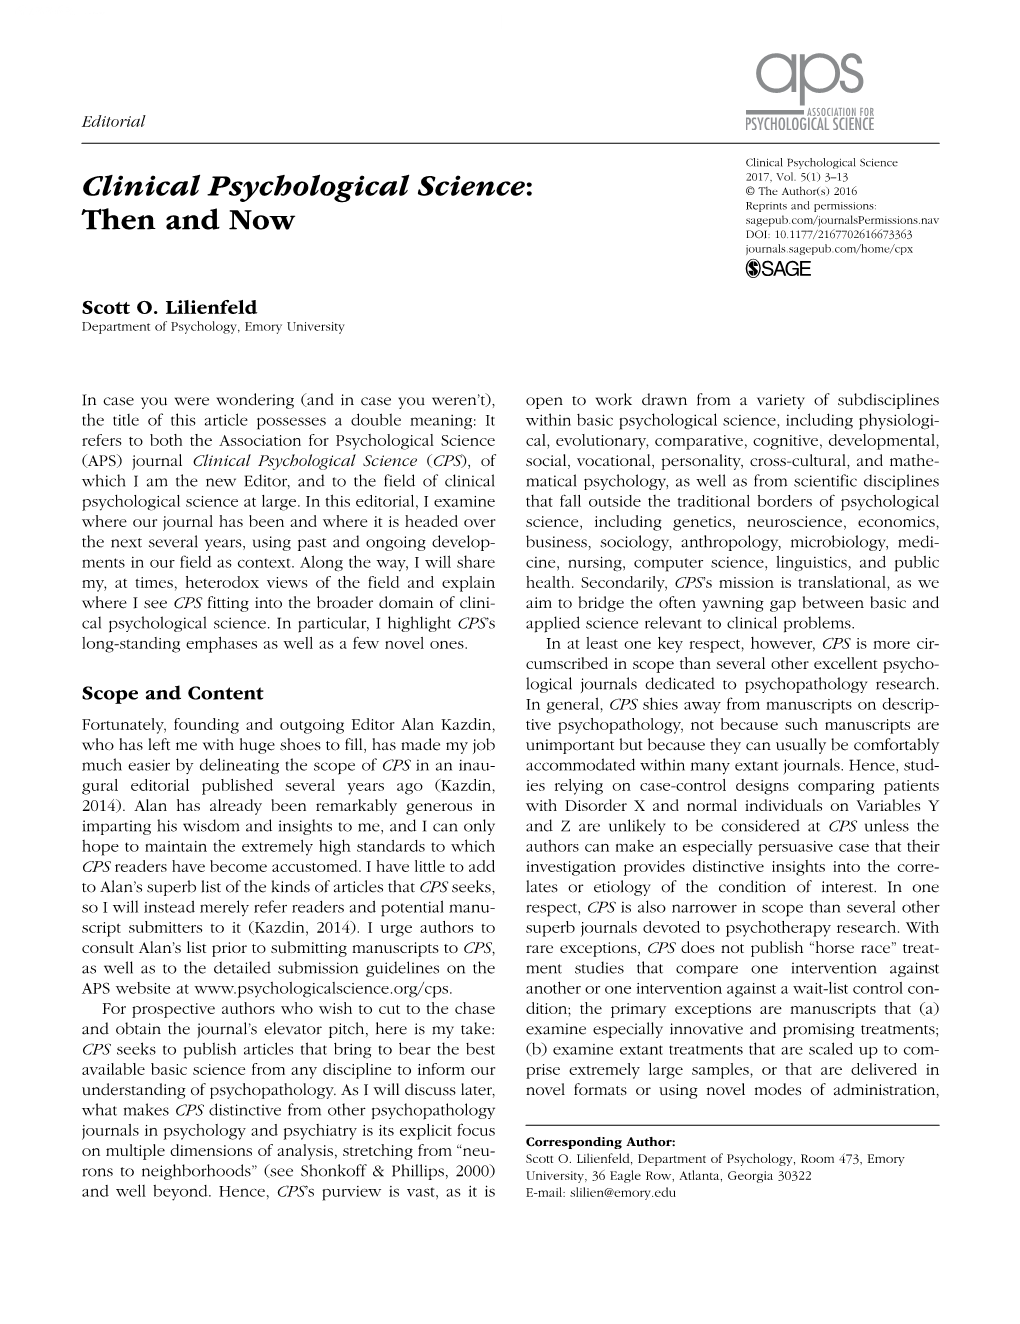 Clinical Psychological Science: Then And